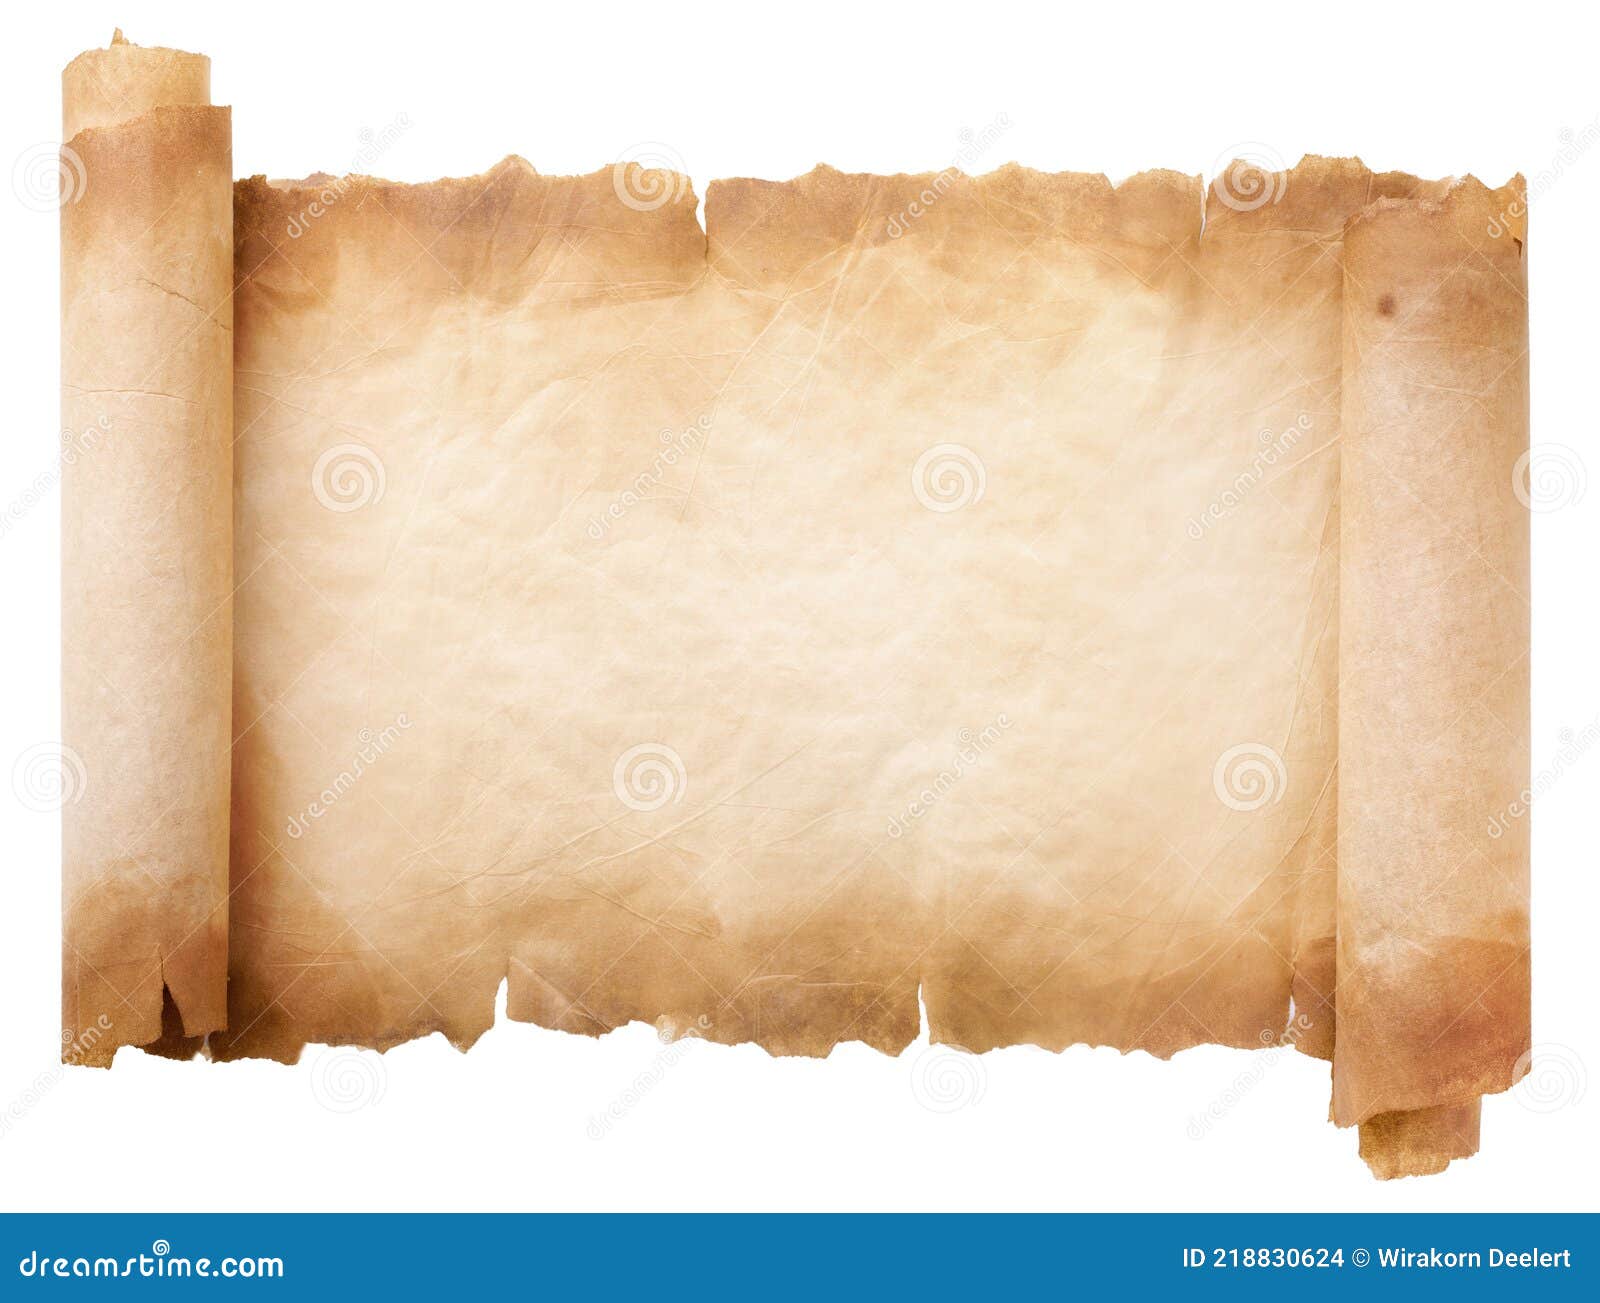 Parchment Vintage Aged Paper Texture Of An Old Sheet Isolated On White  Backgrounds